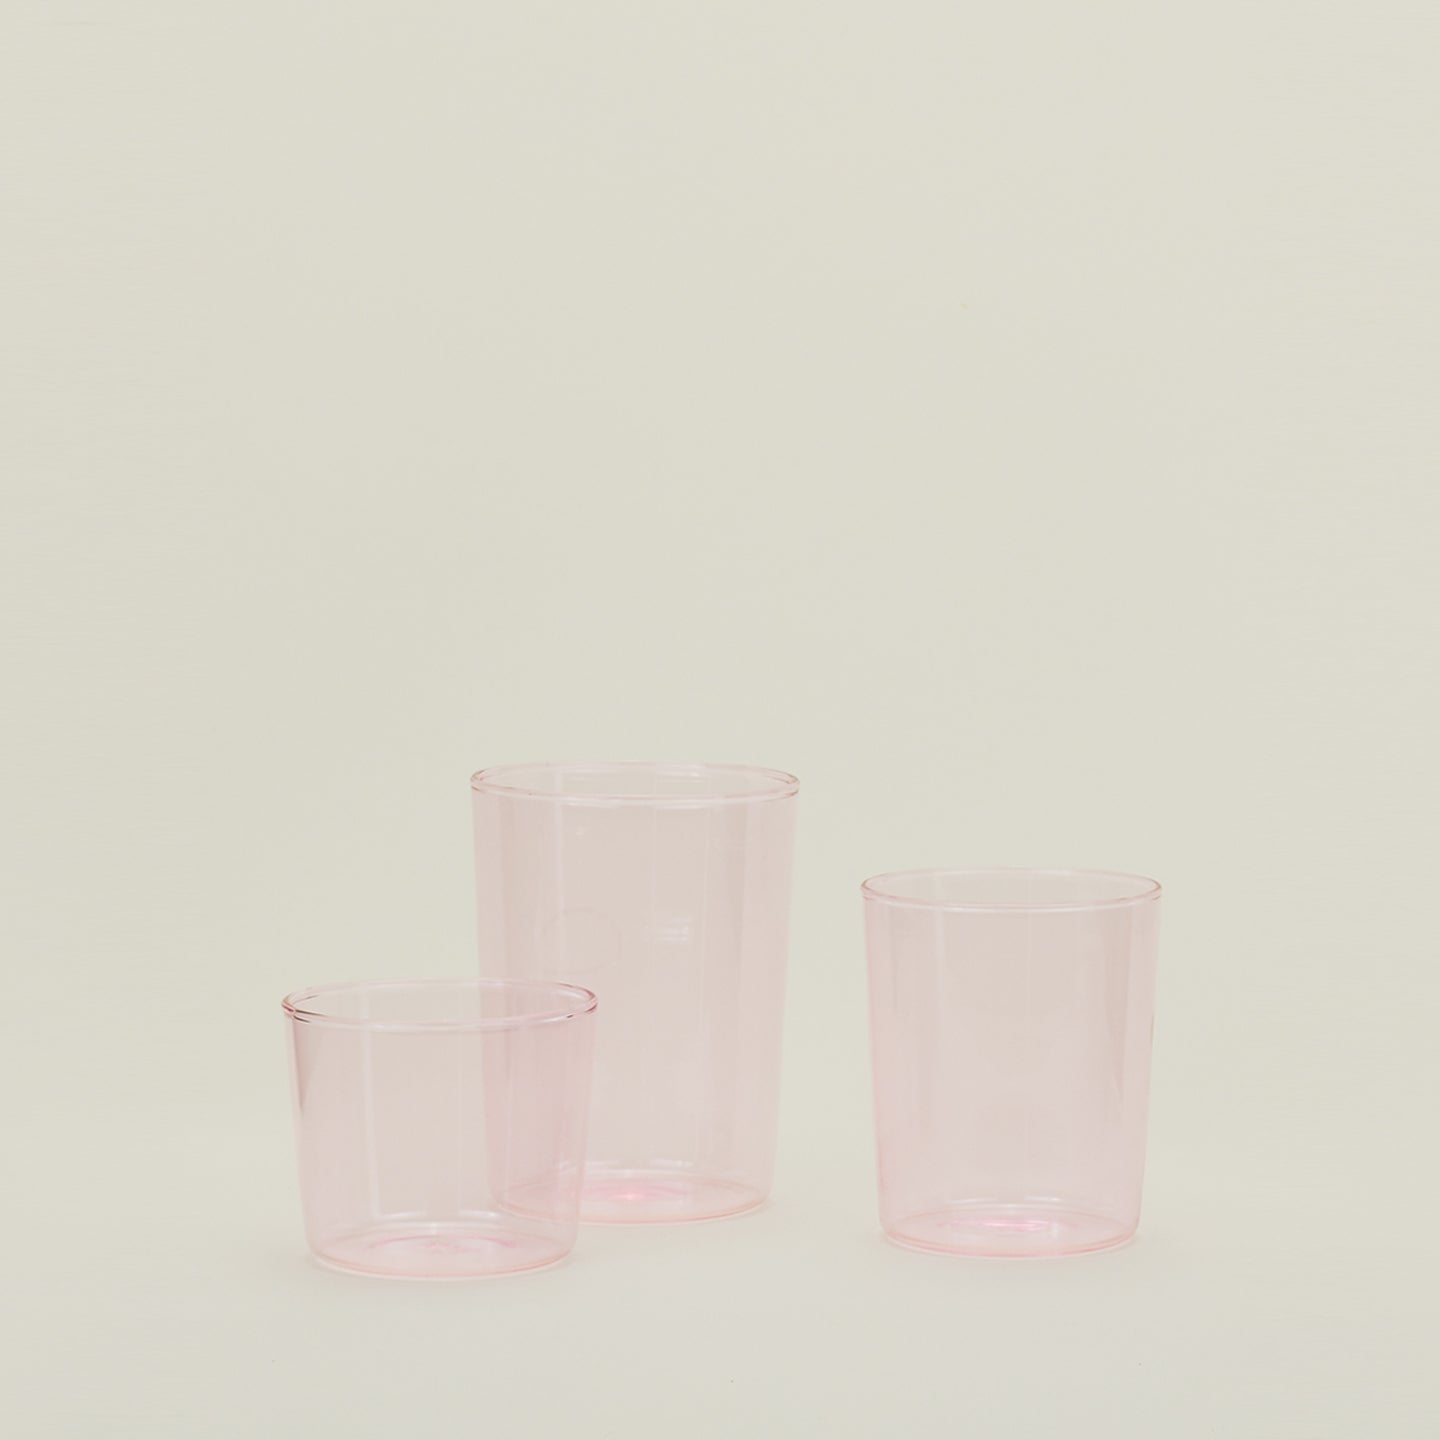 Group of three Essential Glasses in Blush in Small, Medium and Large sizes.